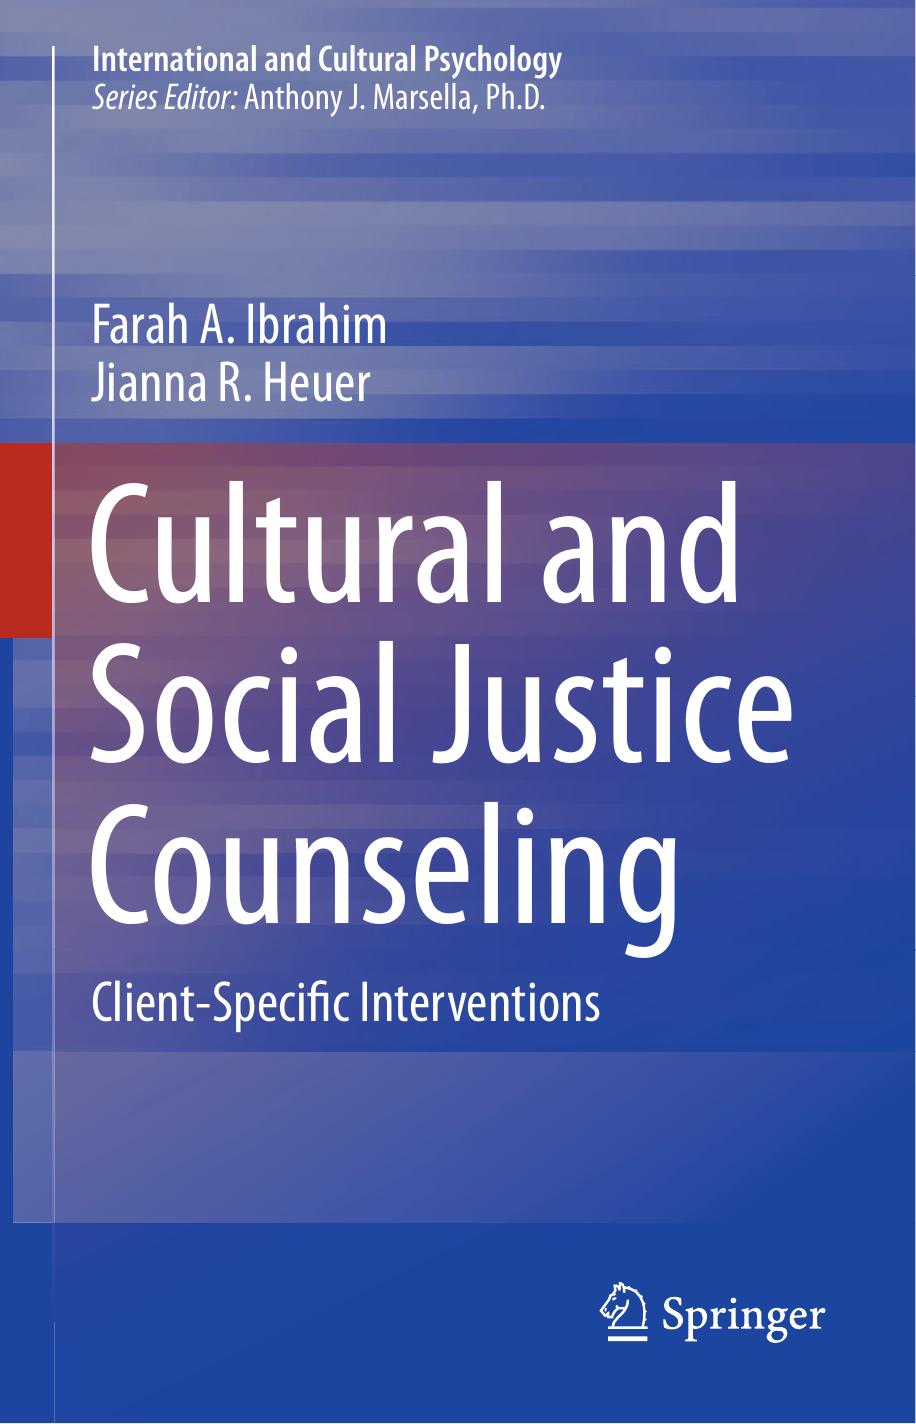 Cultural and Social Justice Counseling  Client-Specific Interventions 2016